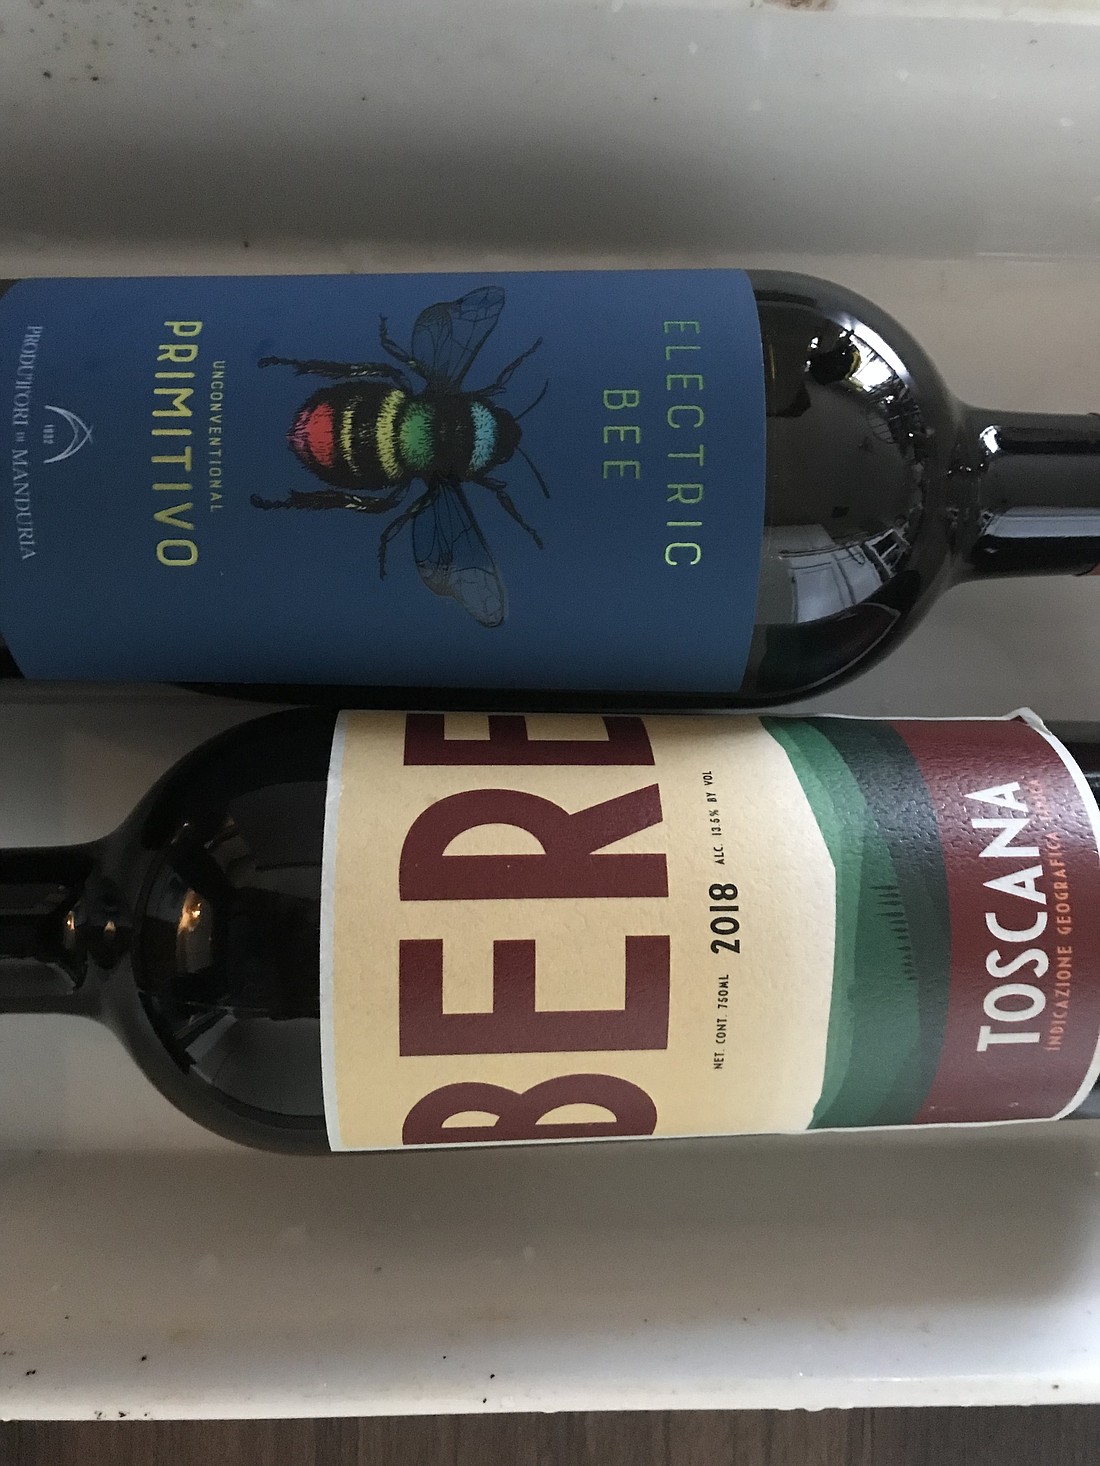 A personal tasting of wine sourced from the Barkley Haggen grocery store included the 2021 Electric Bee Primitivo from the “heel” of Italy. It was full-bodied with mouthwatering aromas of sour cherries that followed through on the palate.